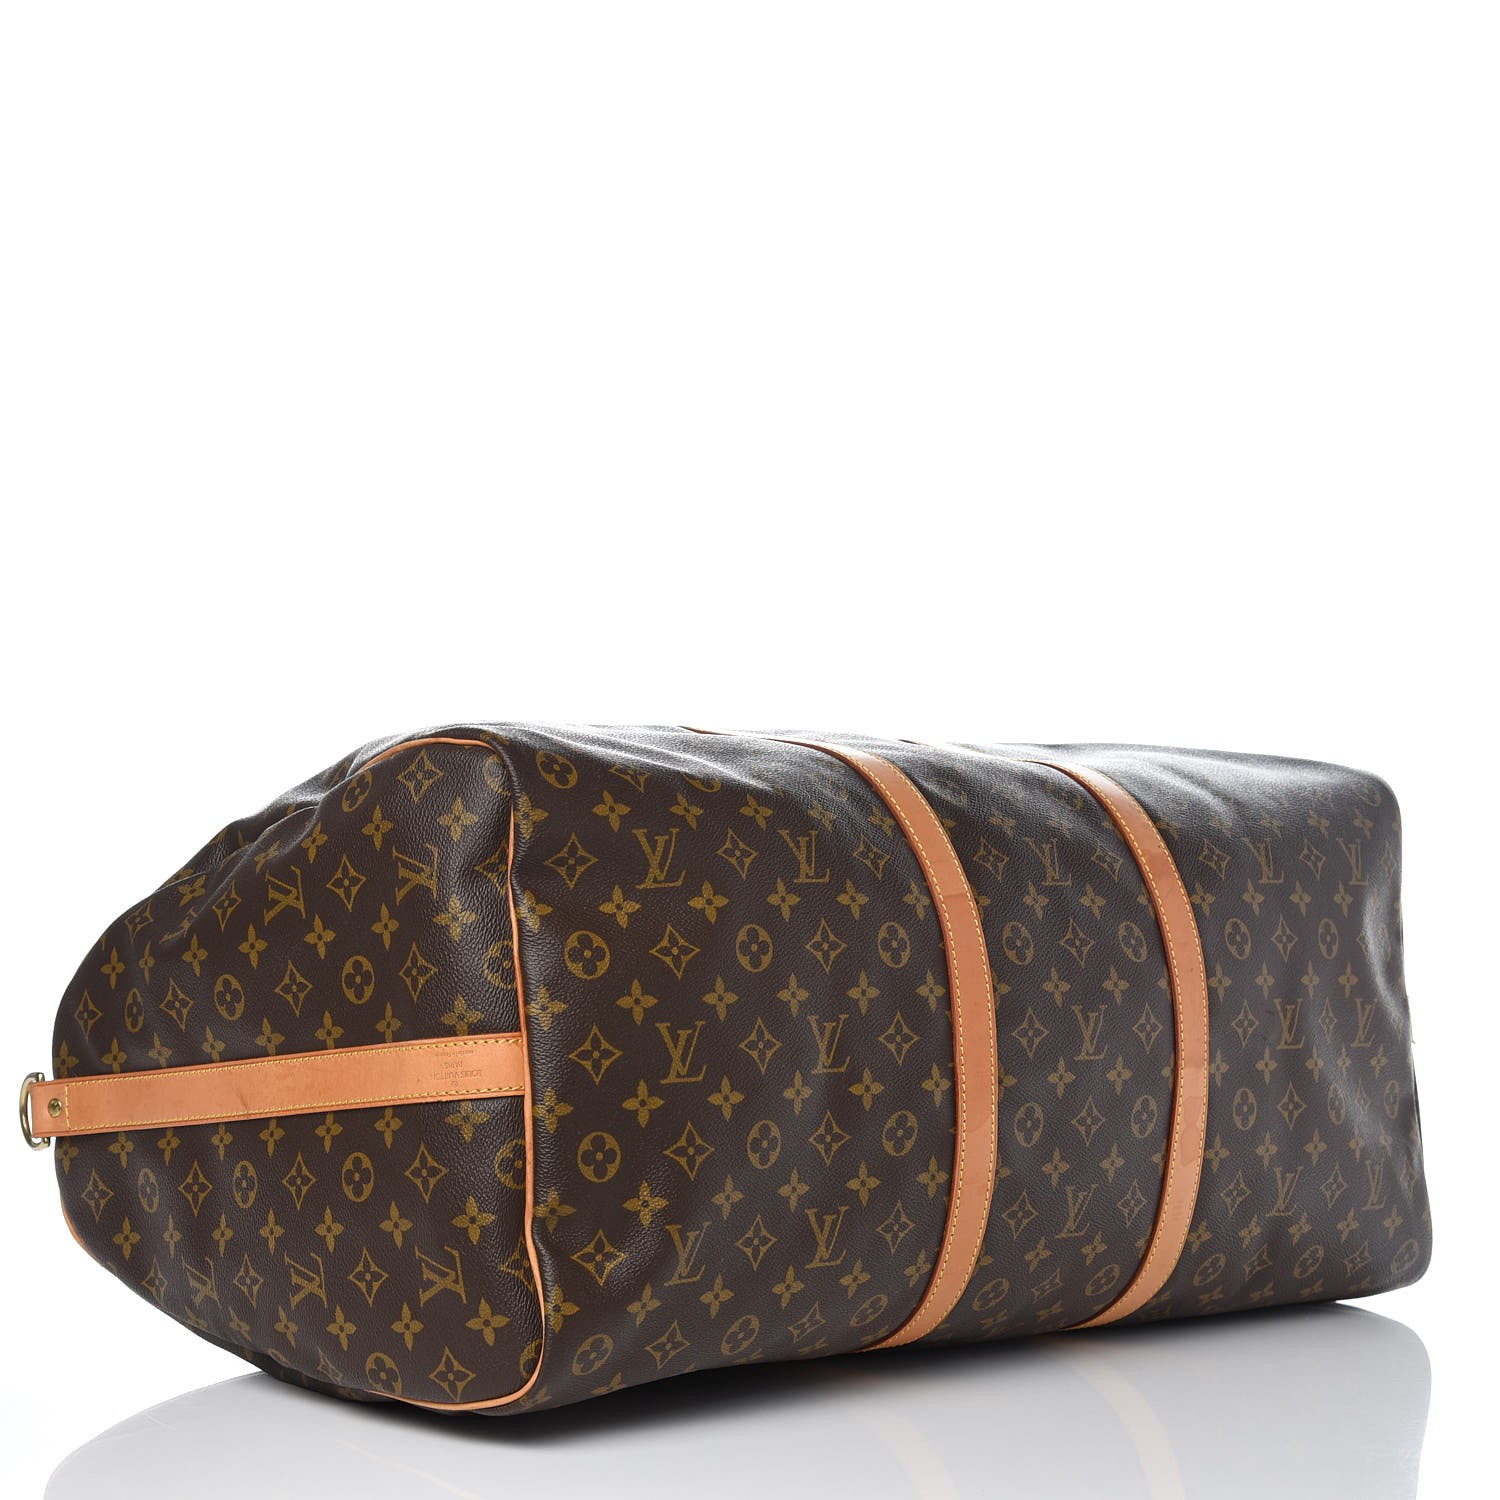 At Auction: A Louis Vuitton Keepall Bandouliere 60